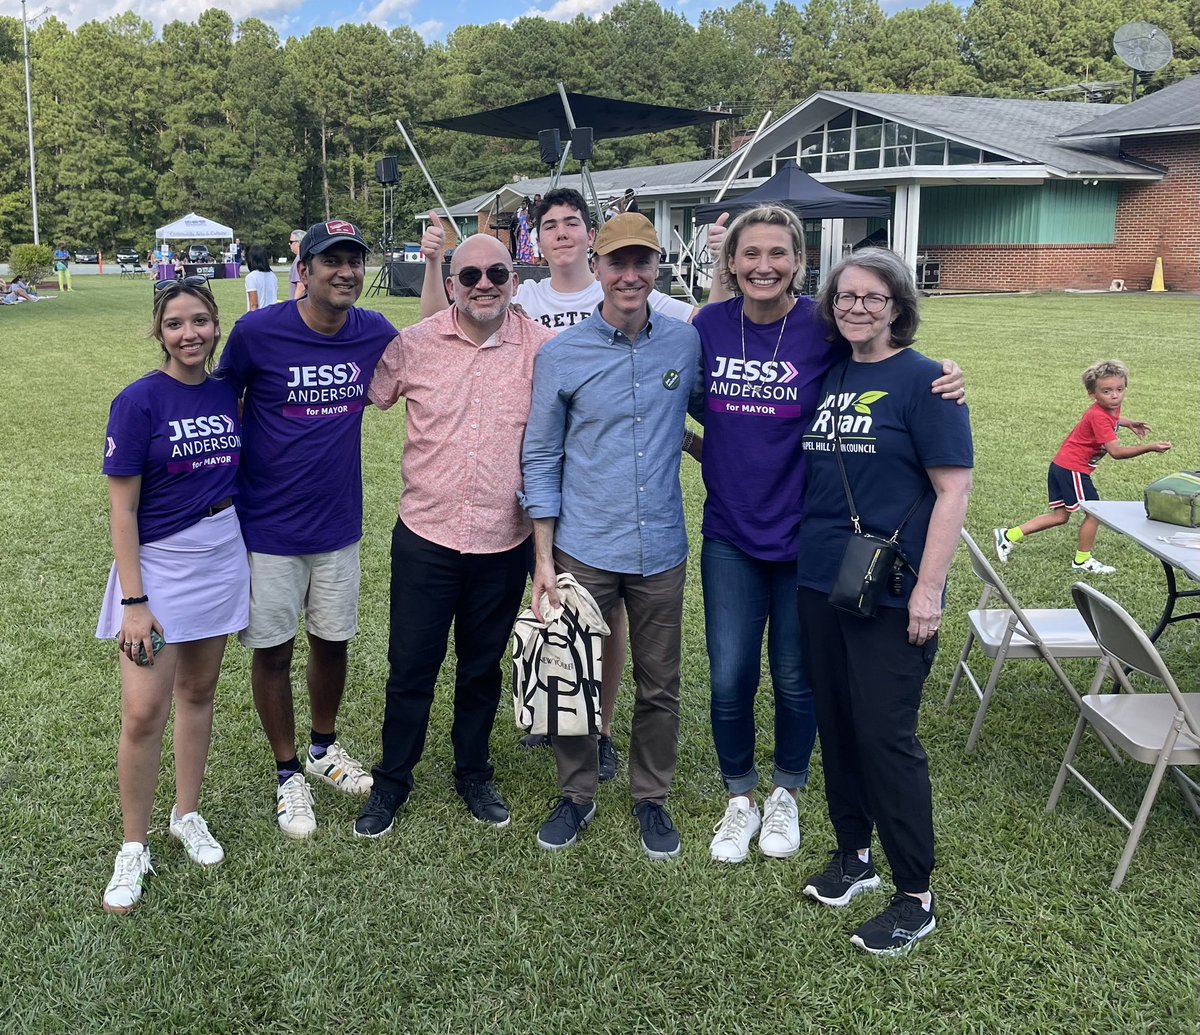 Enjoyed connecting with our community canvassers and candidates and at Live @ Legion! @chapelhillgov #mayorforall